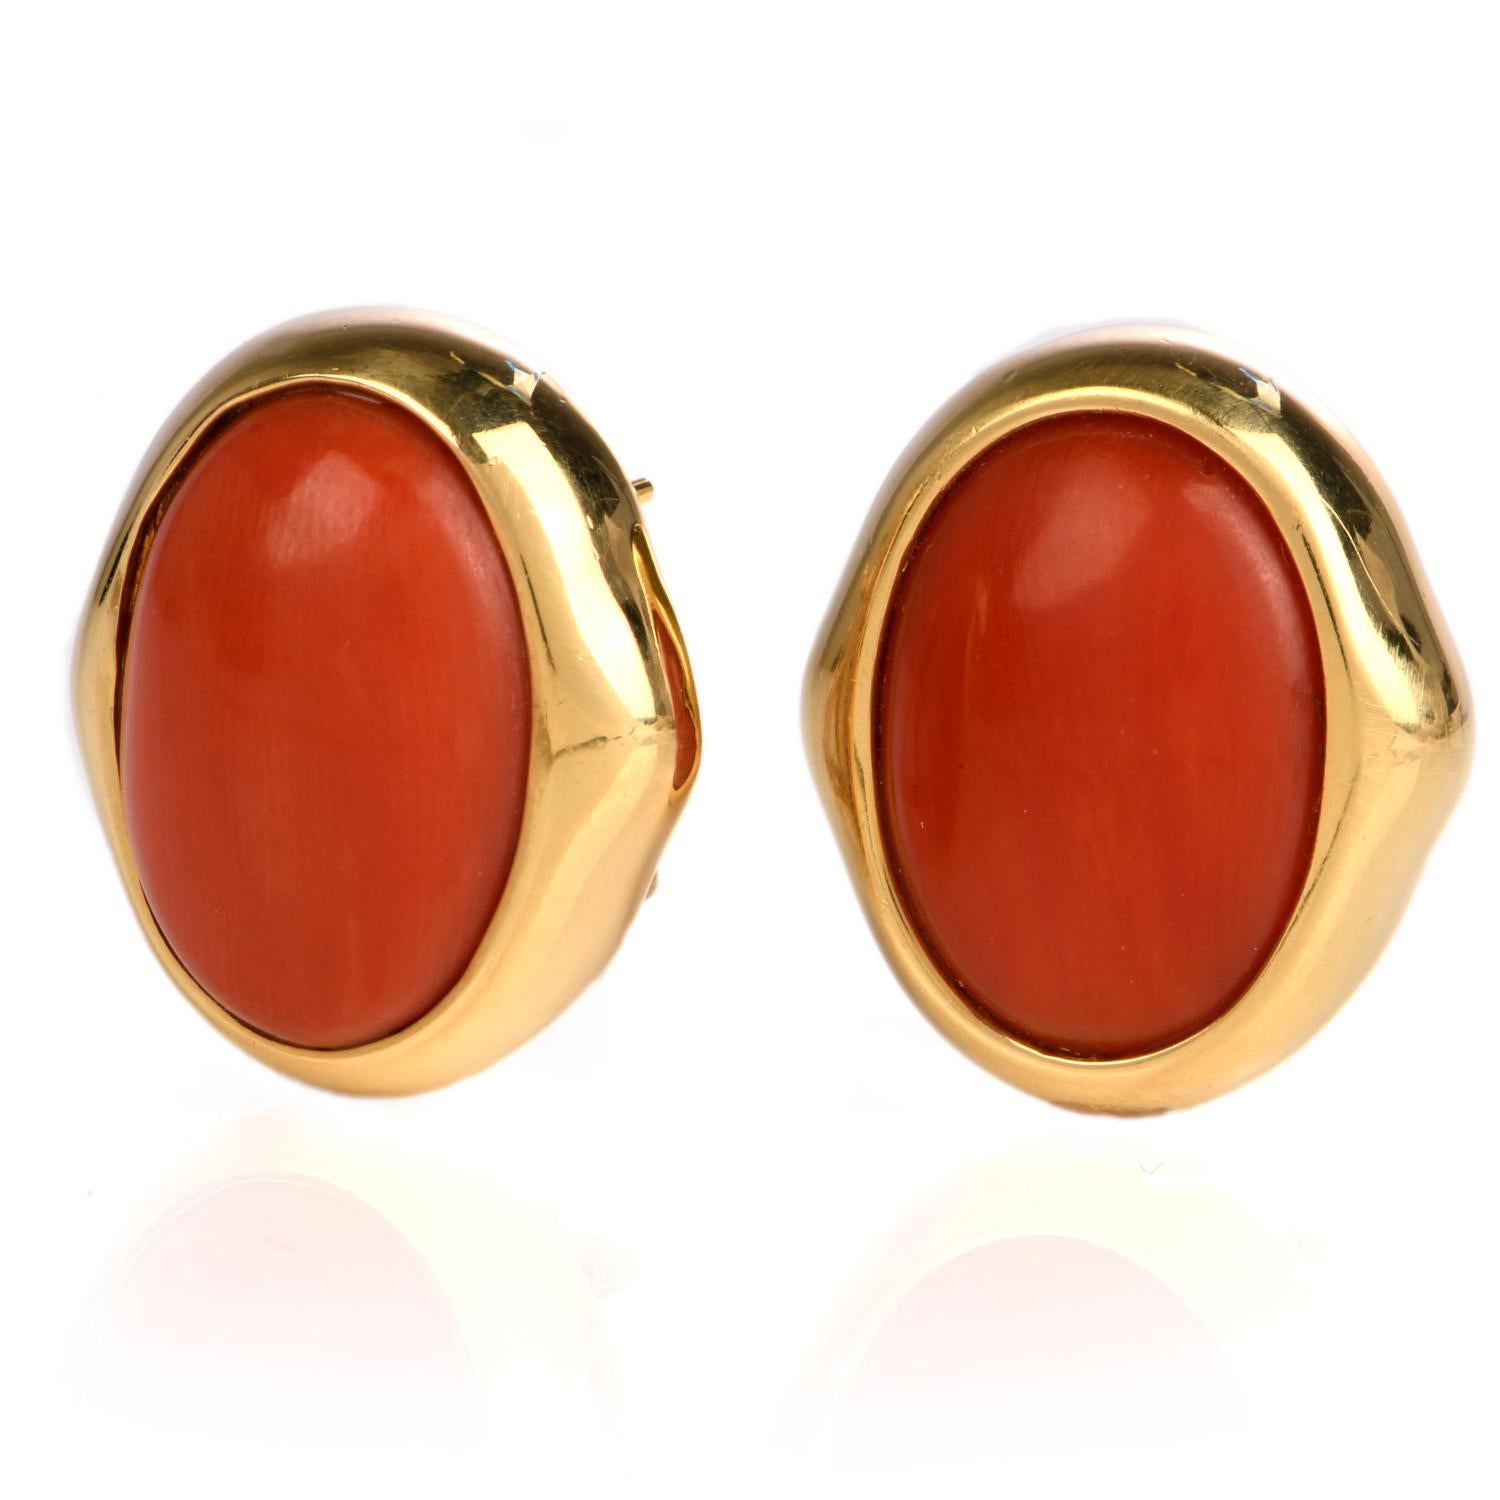 These retro chic Natural coral earrings are crafted in solid 18-karat yellow gold, weighing 16.5 grams and measuring 22mm long x 19mm wide. Showcasing a pair of bezel-set natural salmon coral oval cabochons. Secure with post and lever back, signed,